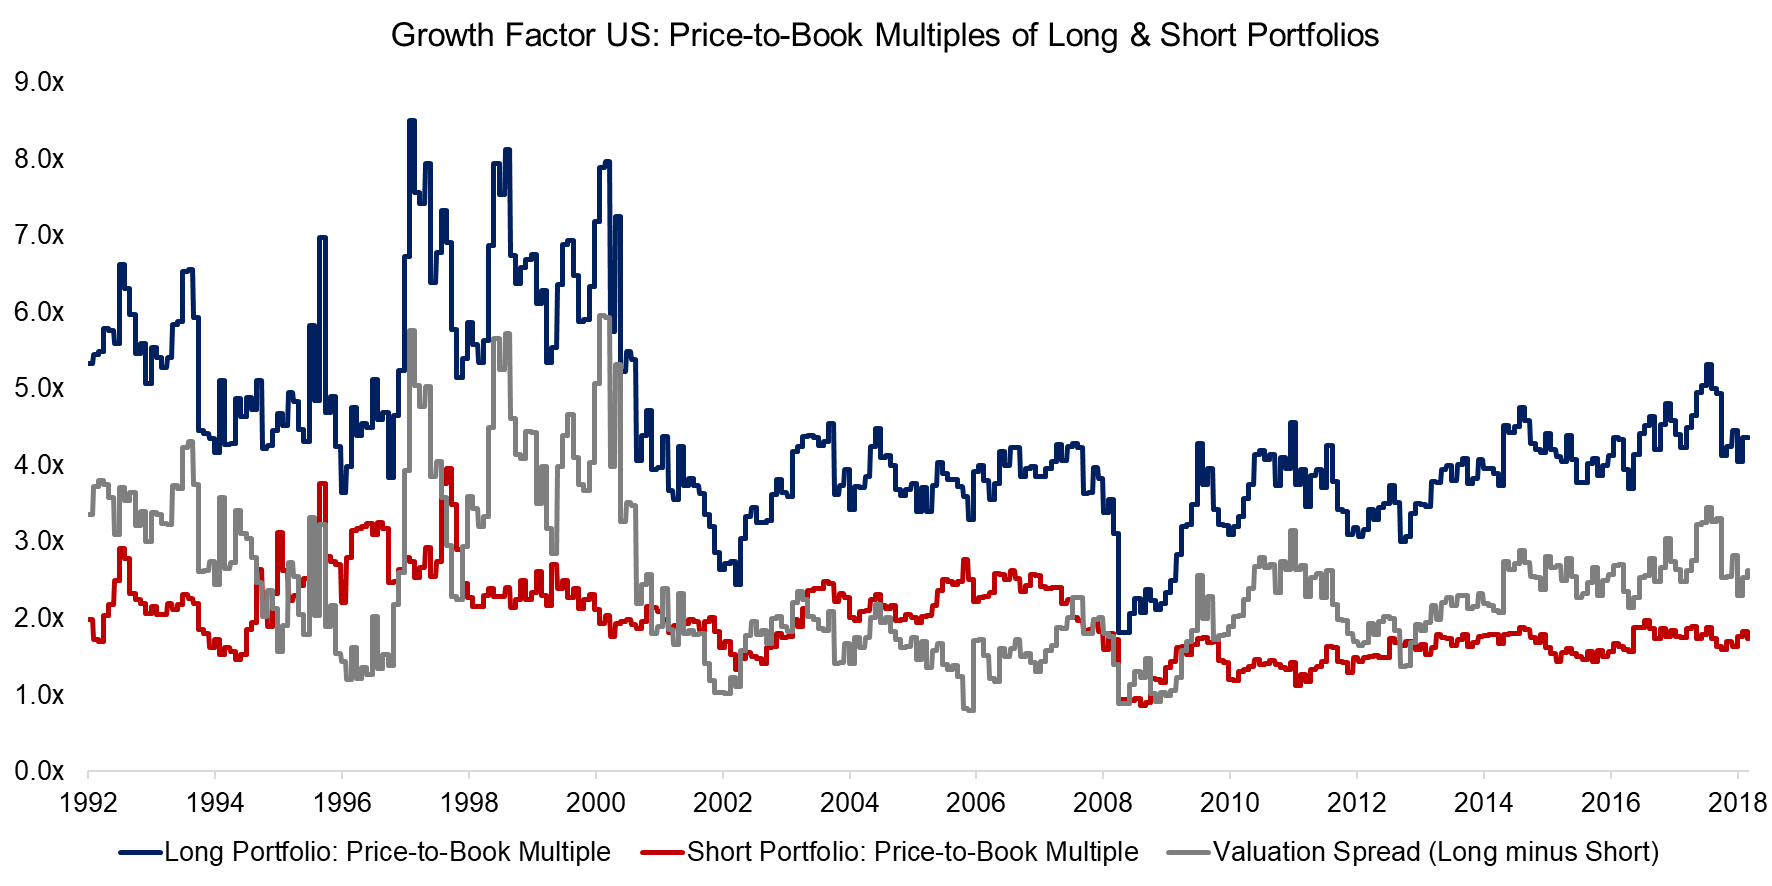 Growth Factor US Price-to-Book Multiples of Long & Short Portfolios